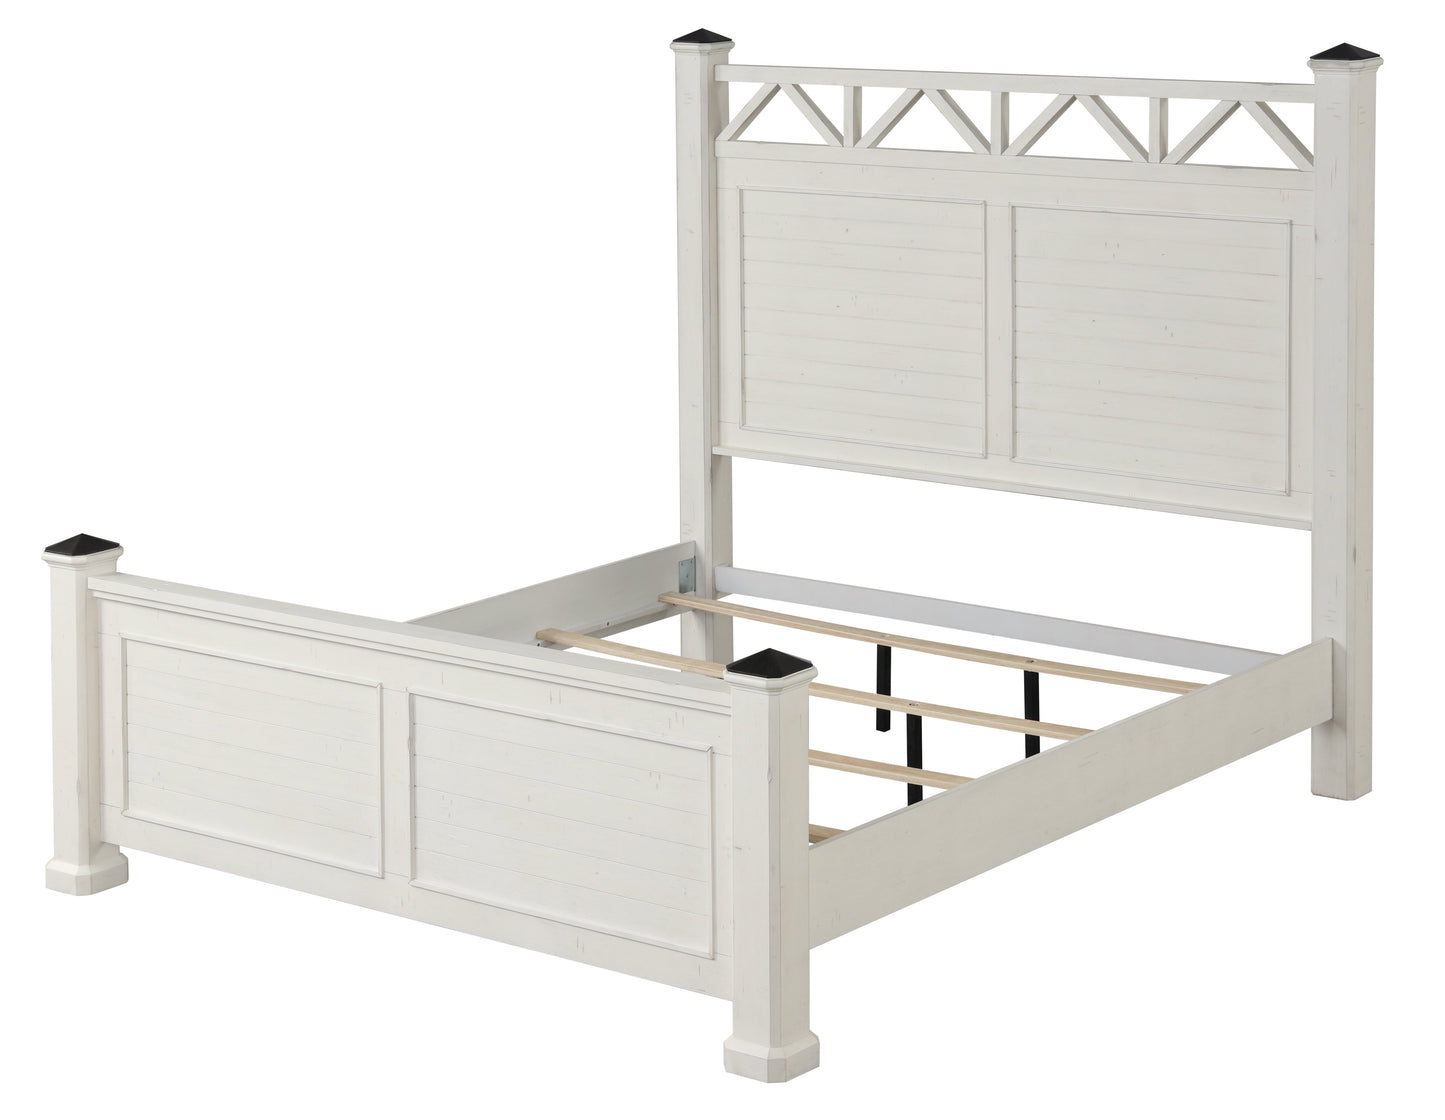 Laria Antique White Finish Wood Bedroom Collection